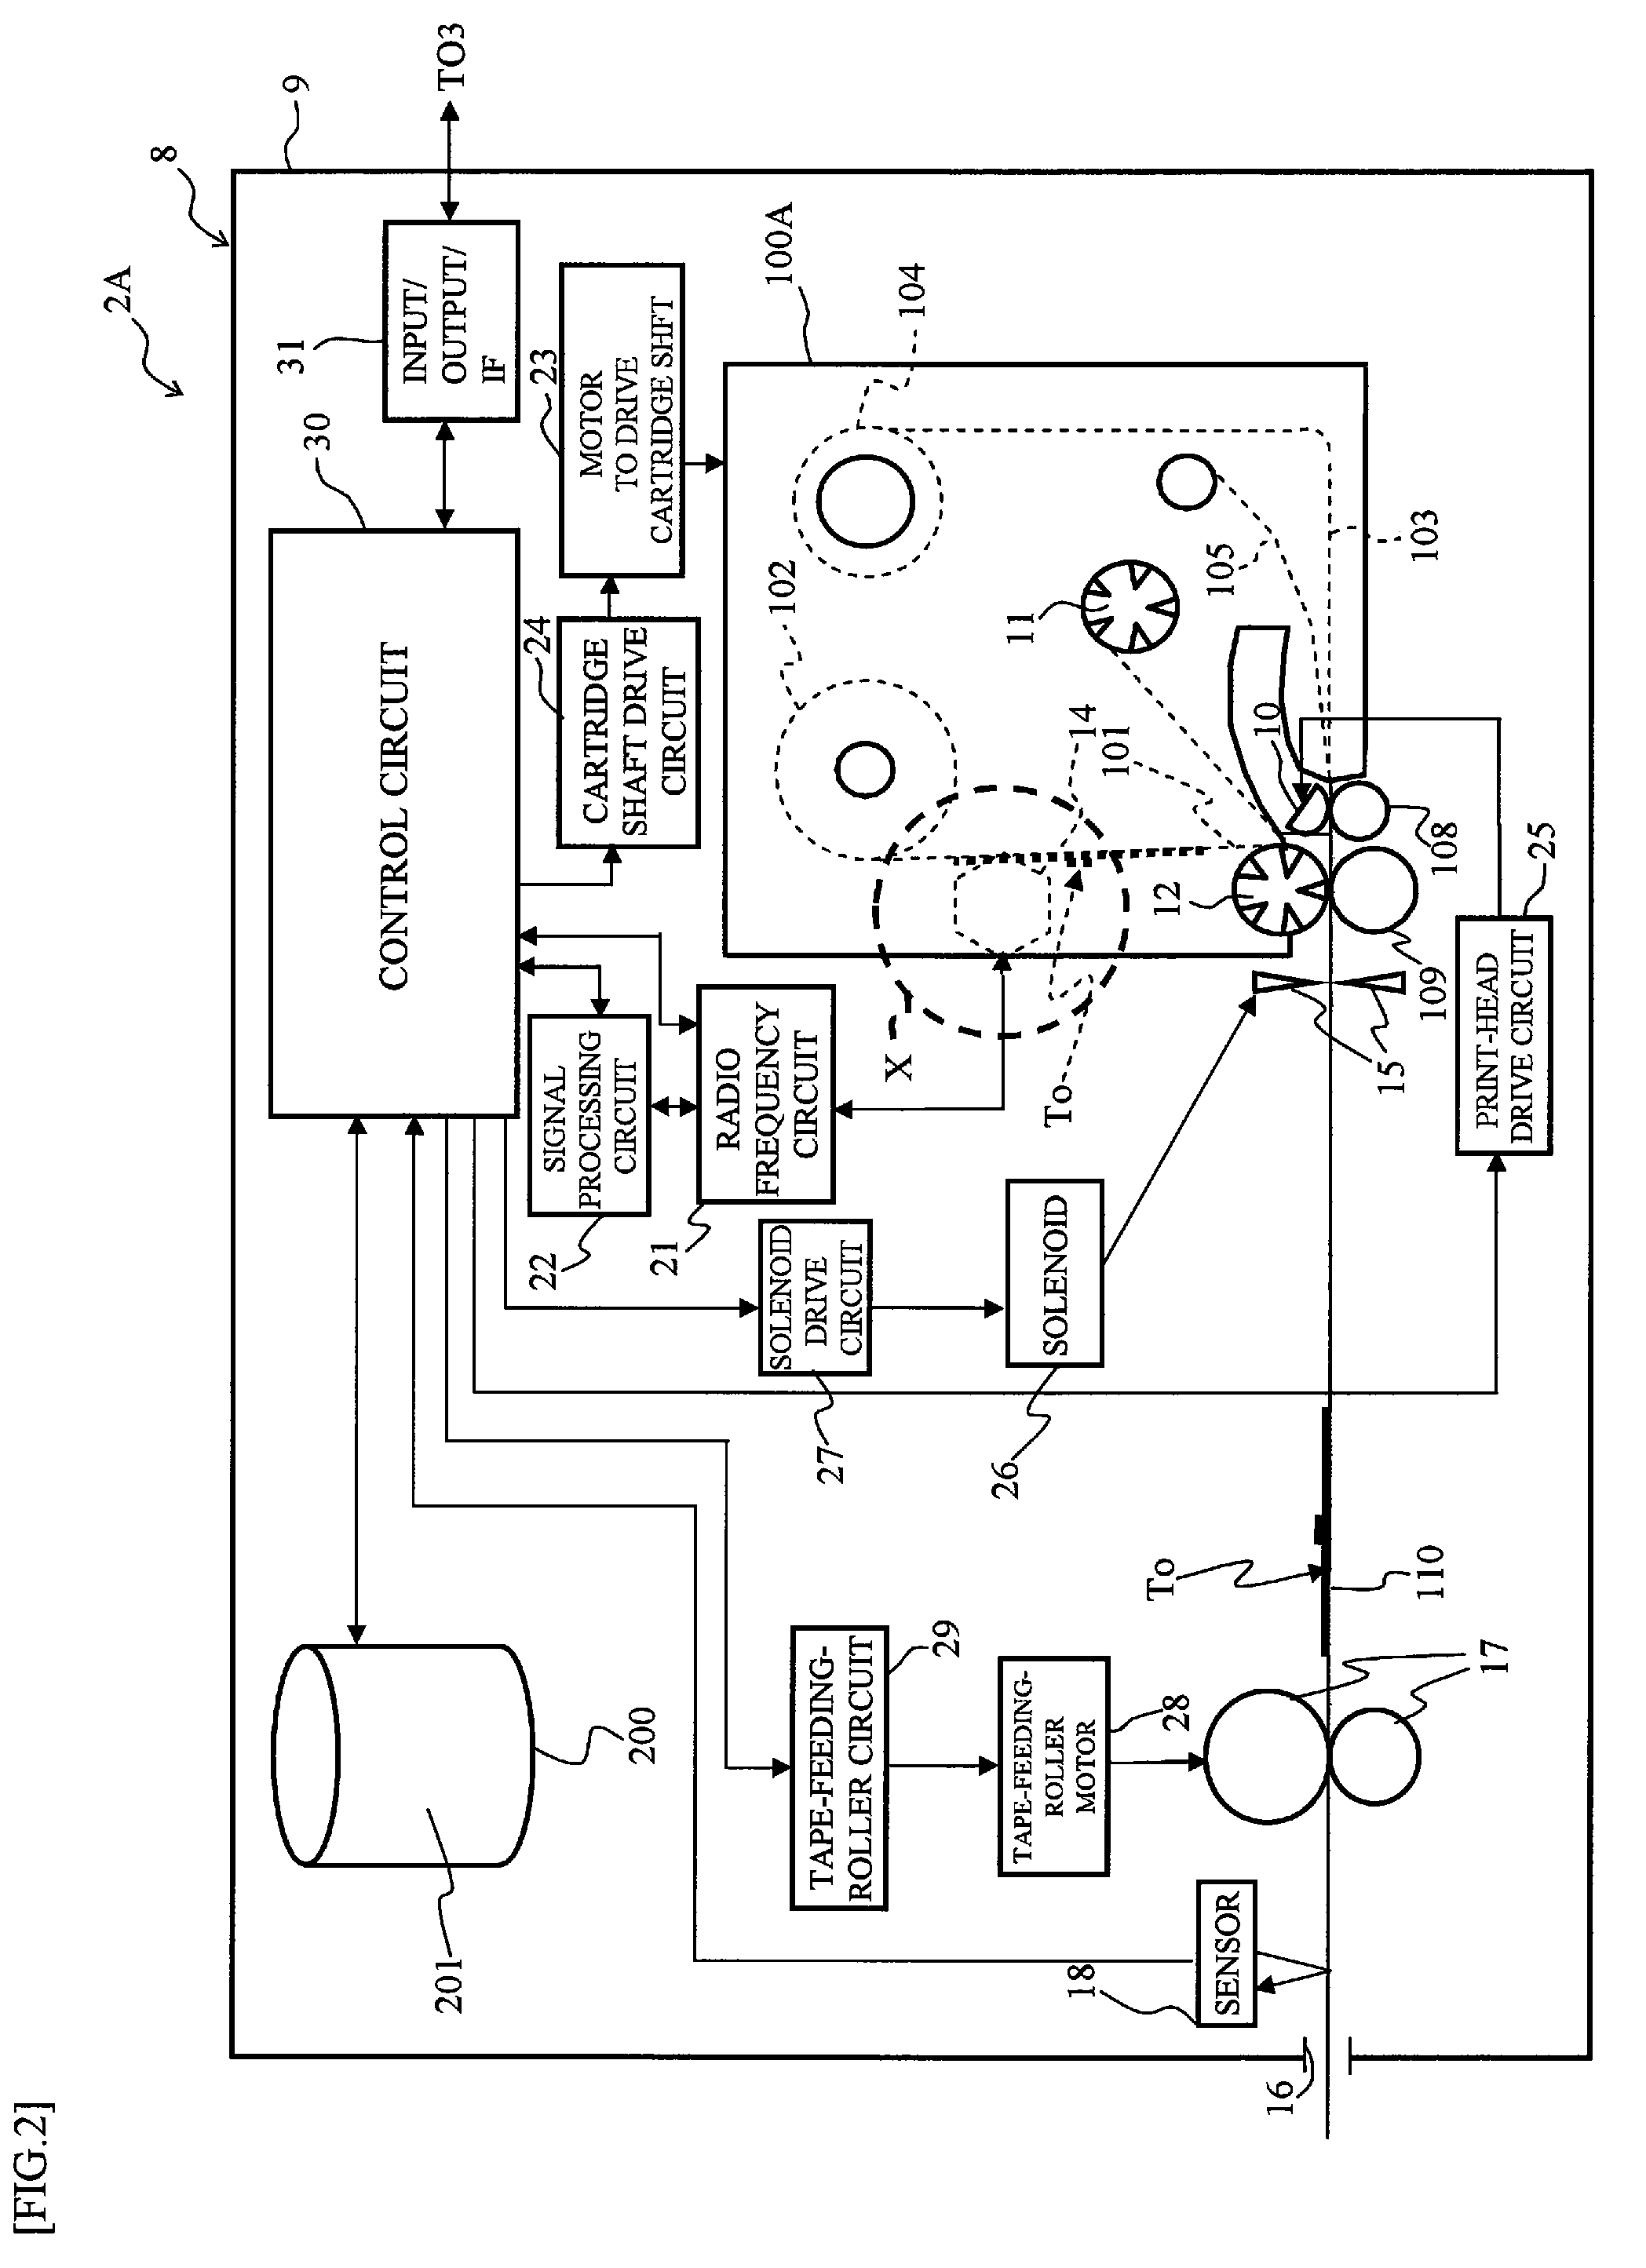 System and apparatus for managing information and communicating with a RFID tag